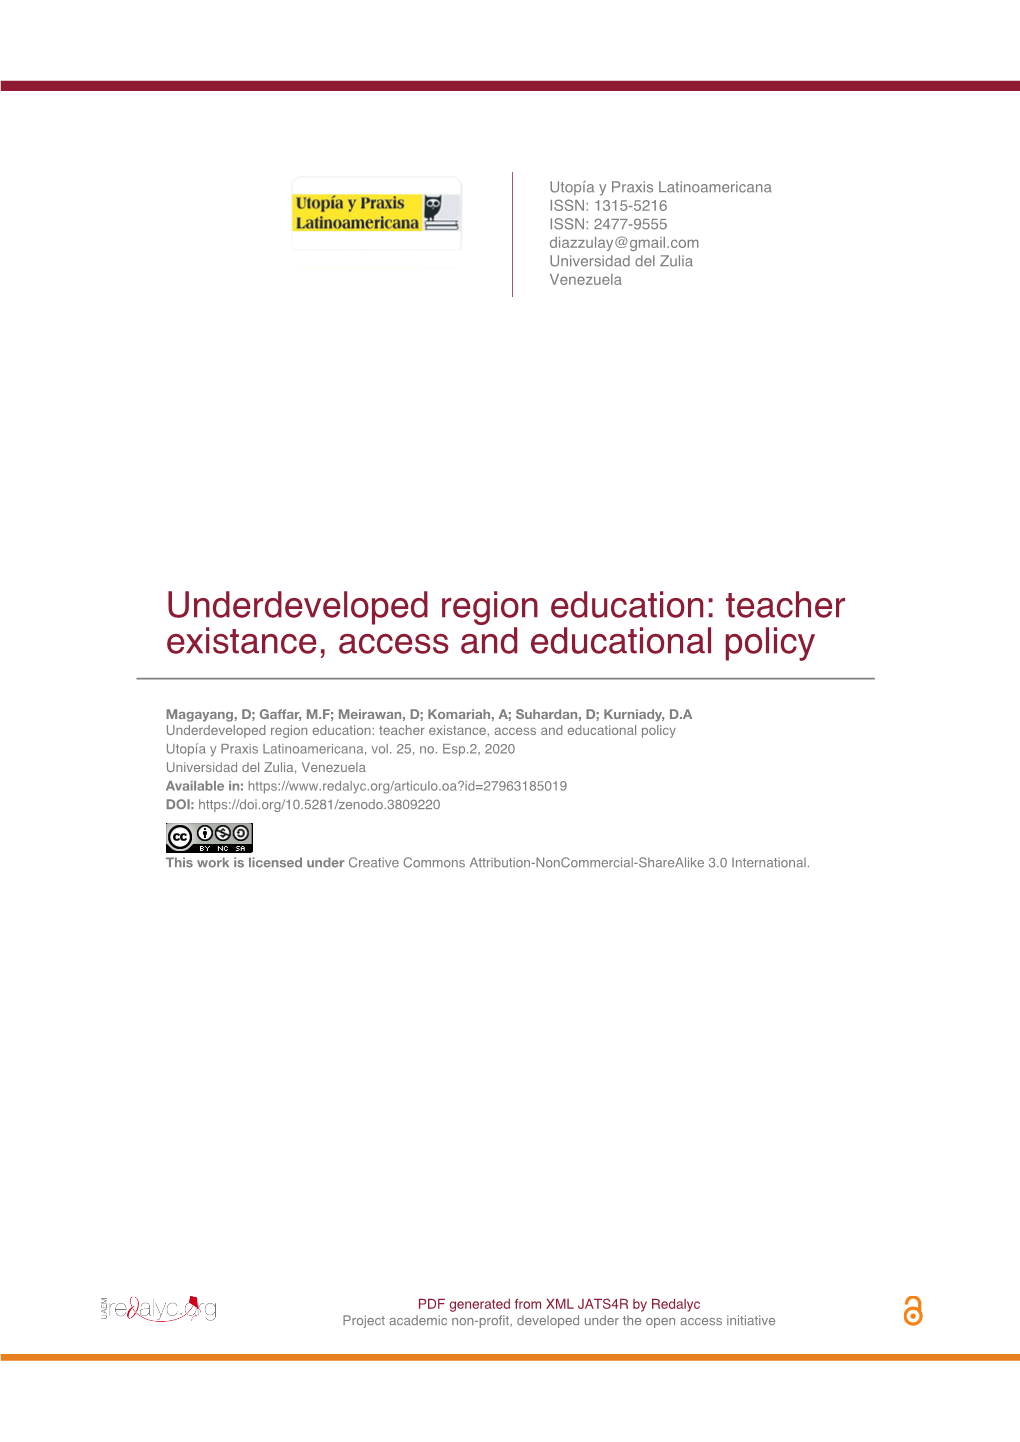 Underdeveloped Region Education: Teacher Existance, Access and Educational Policy